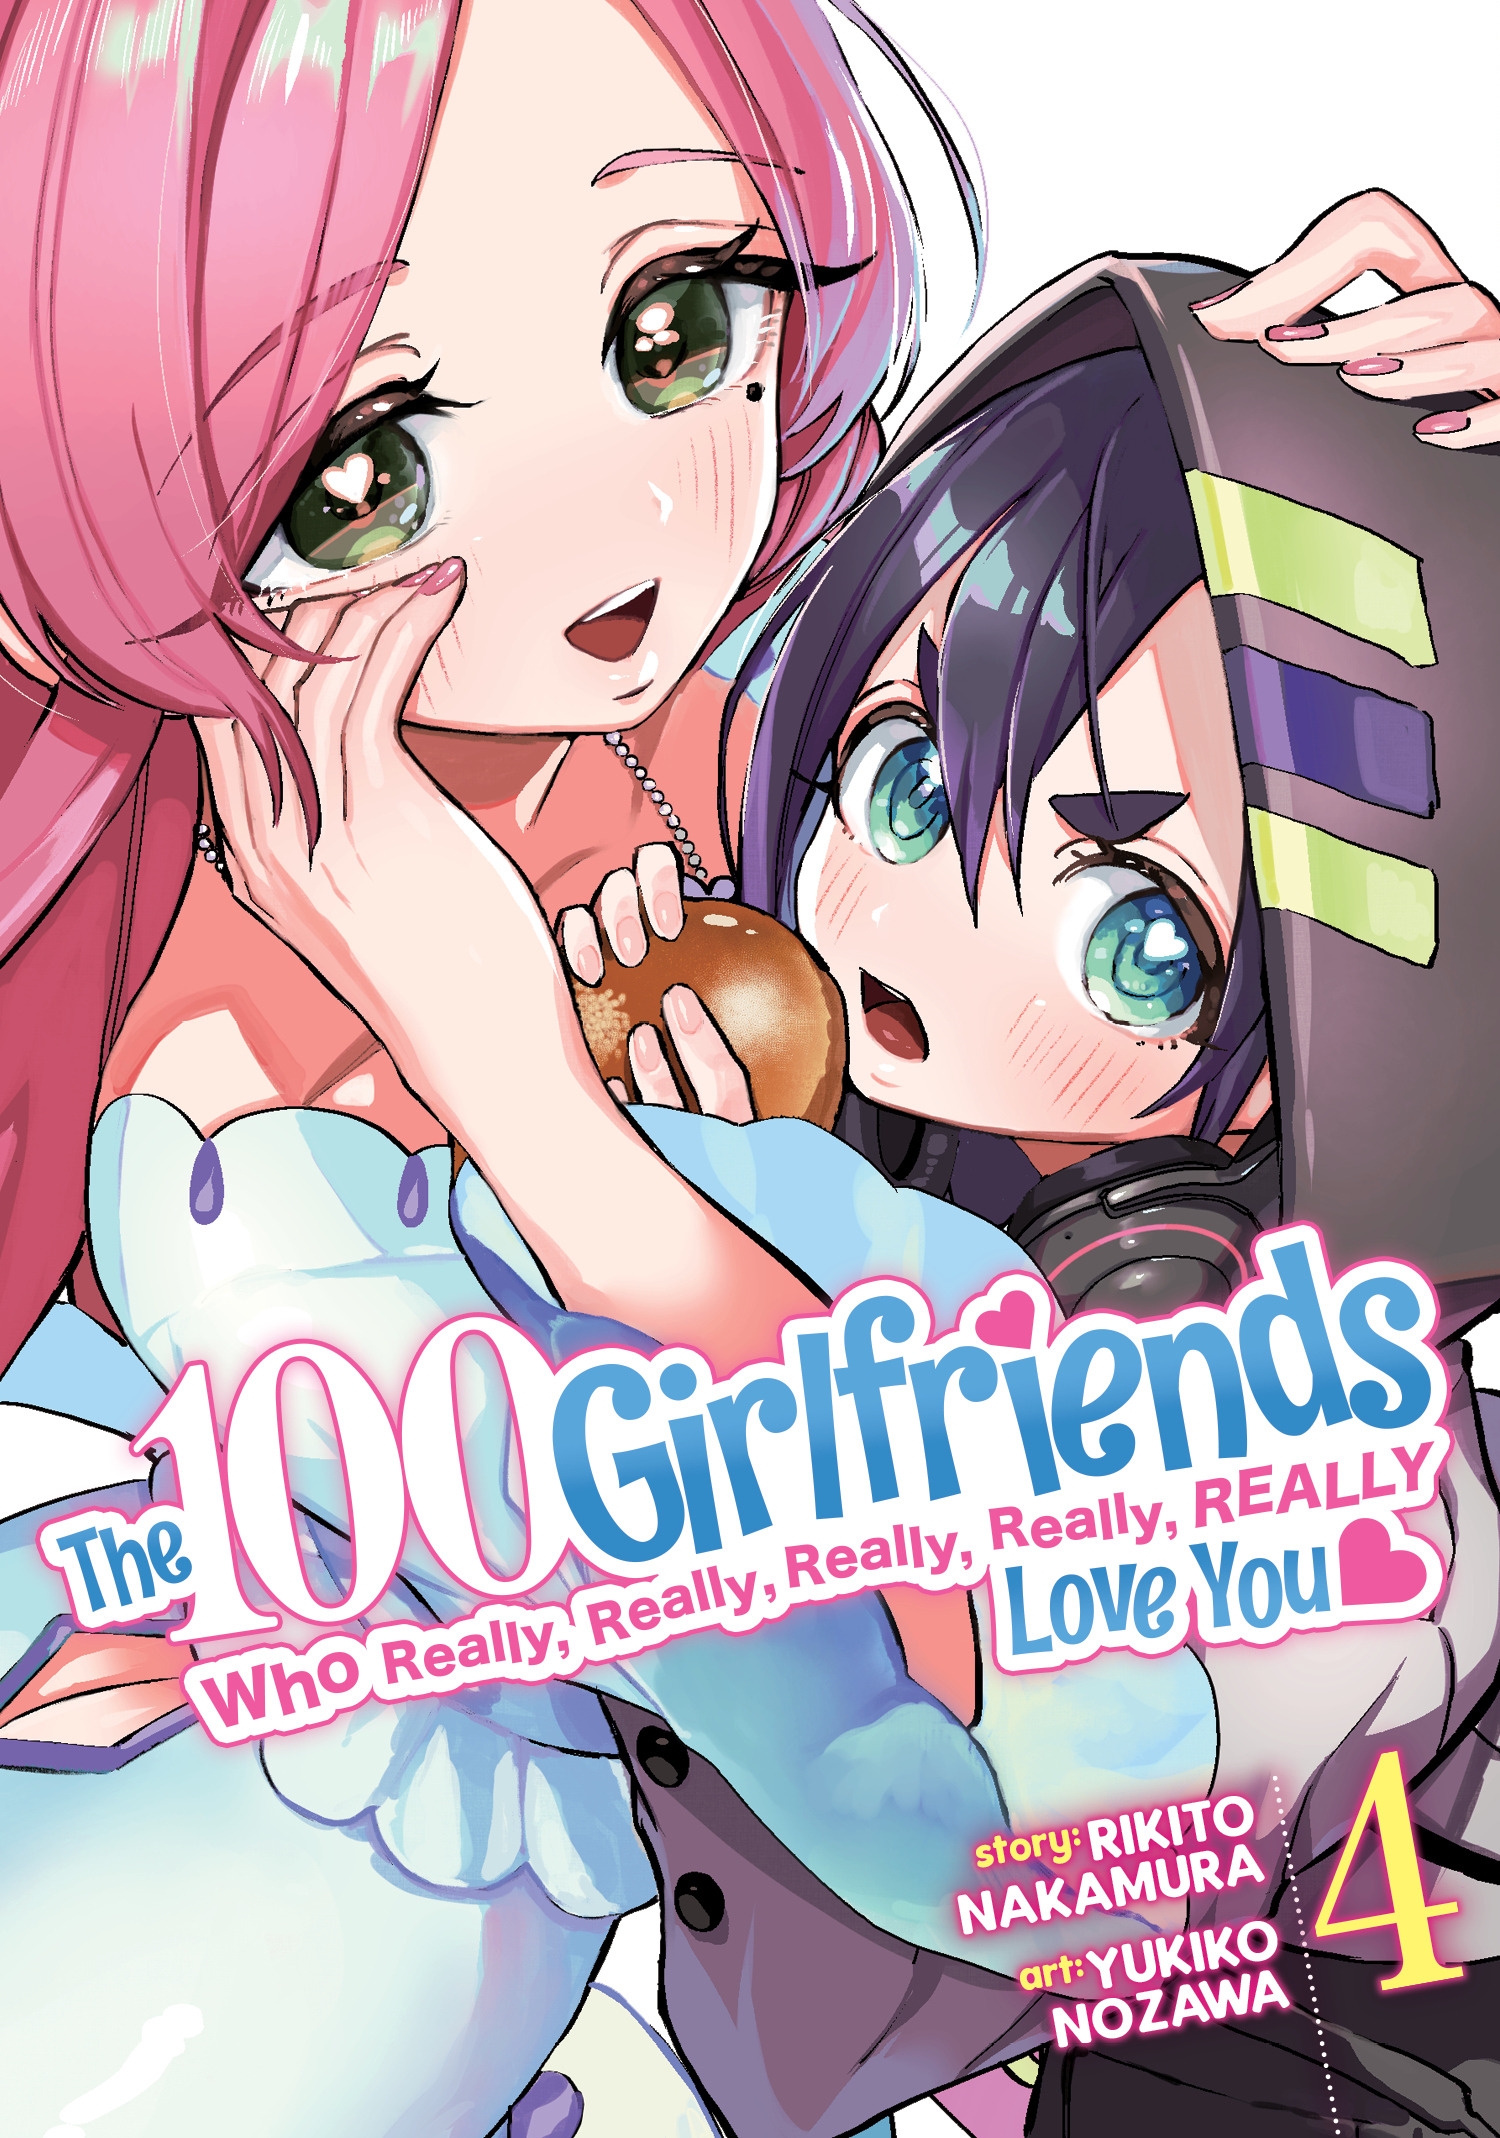 Best Romcom  The 100 Girlfriends Who Really Really Really Really Really  Love You Vol 2 Manga Review  YouTube